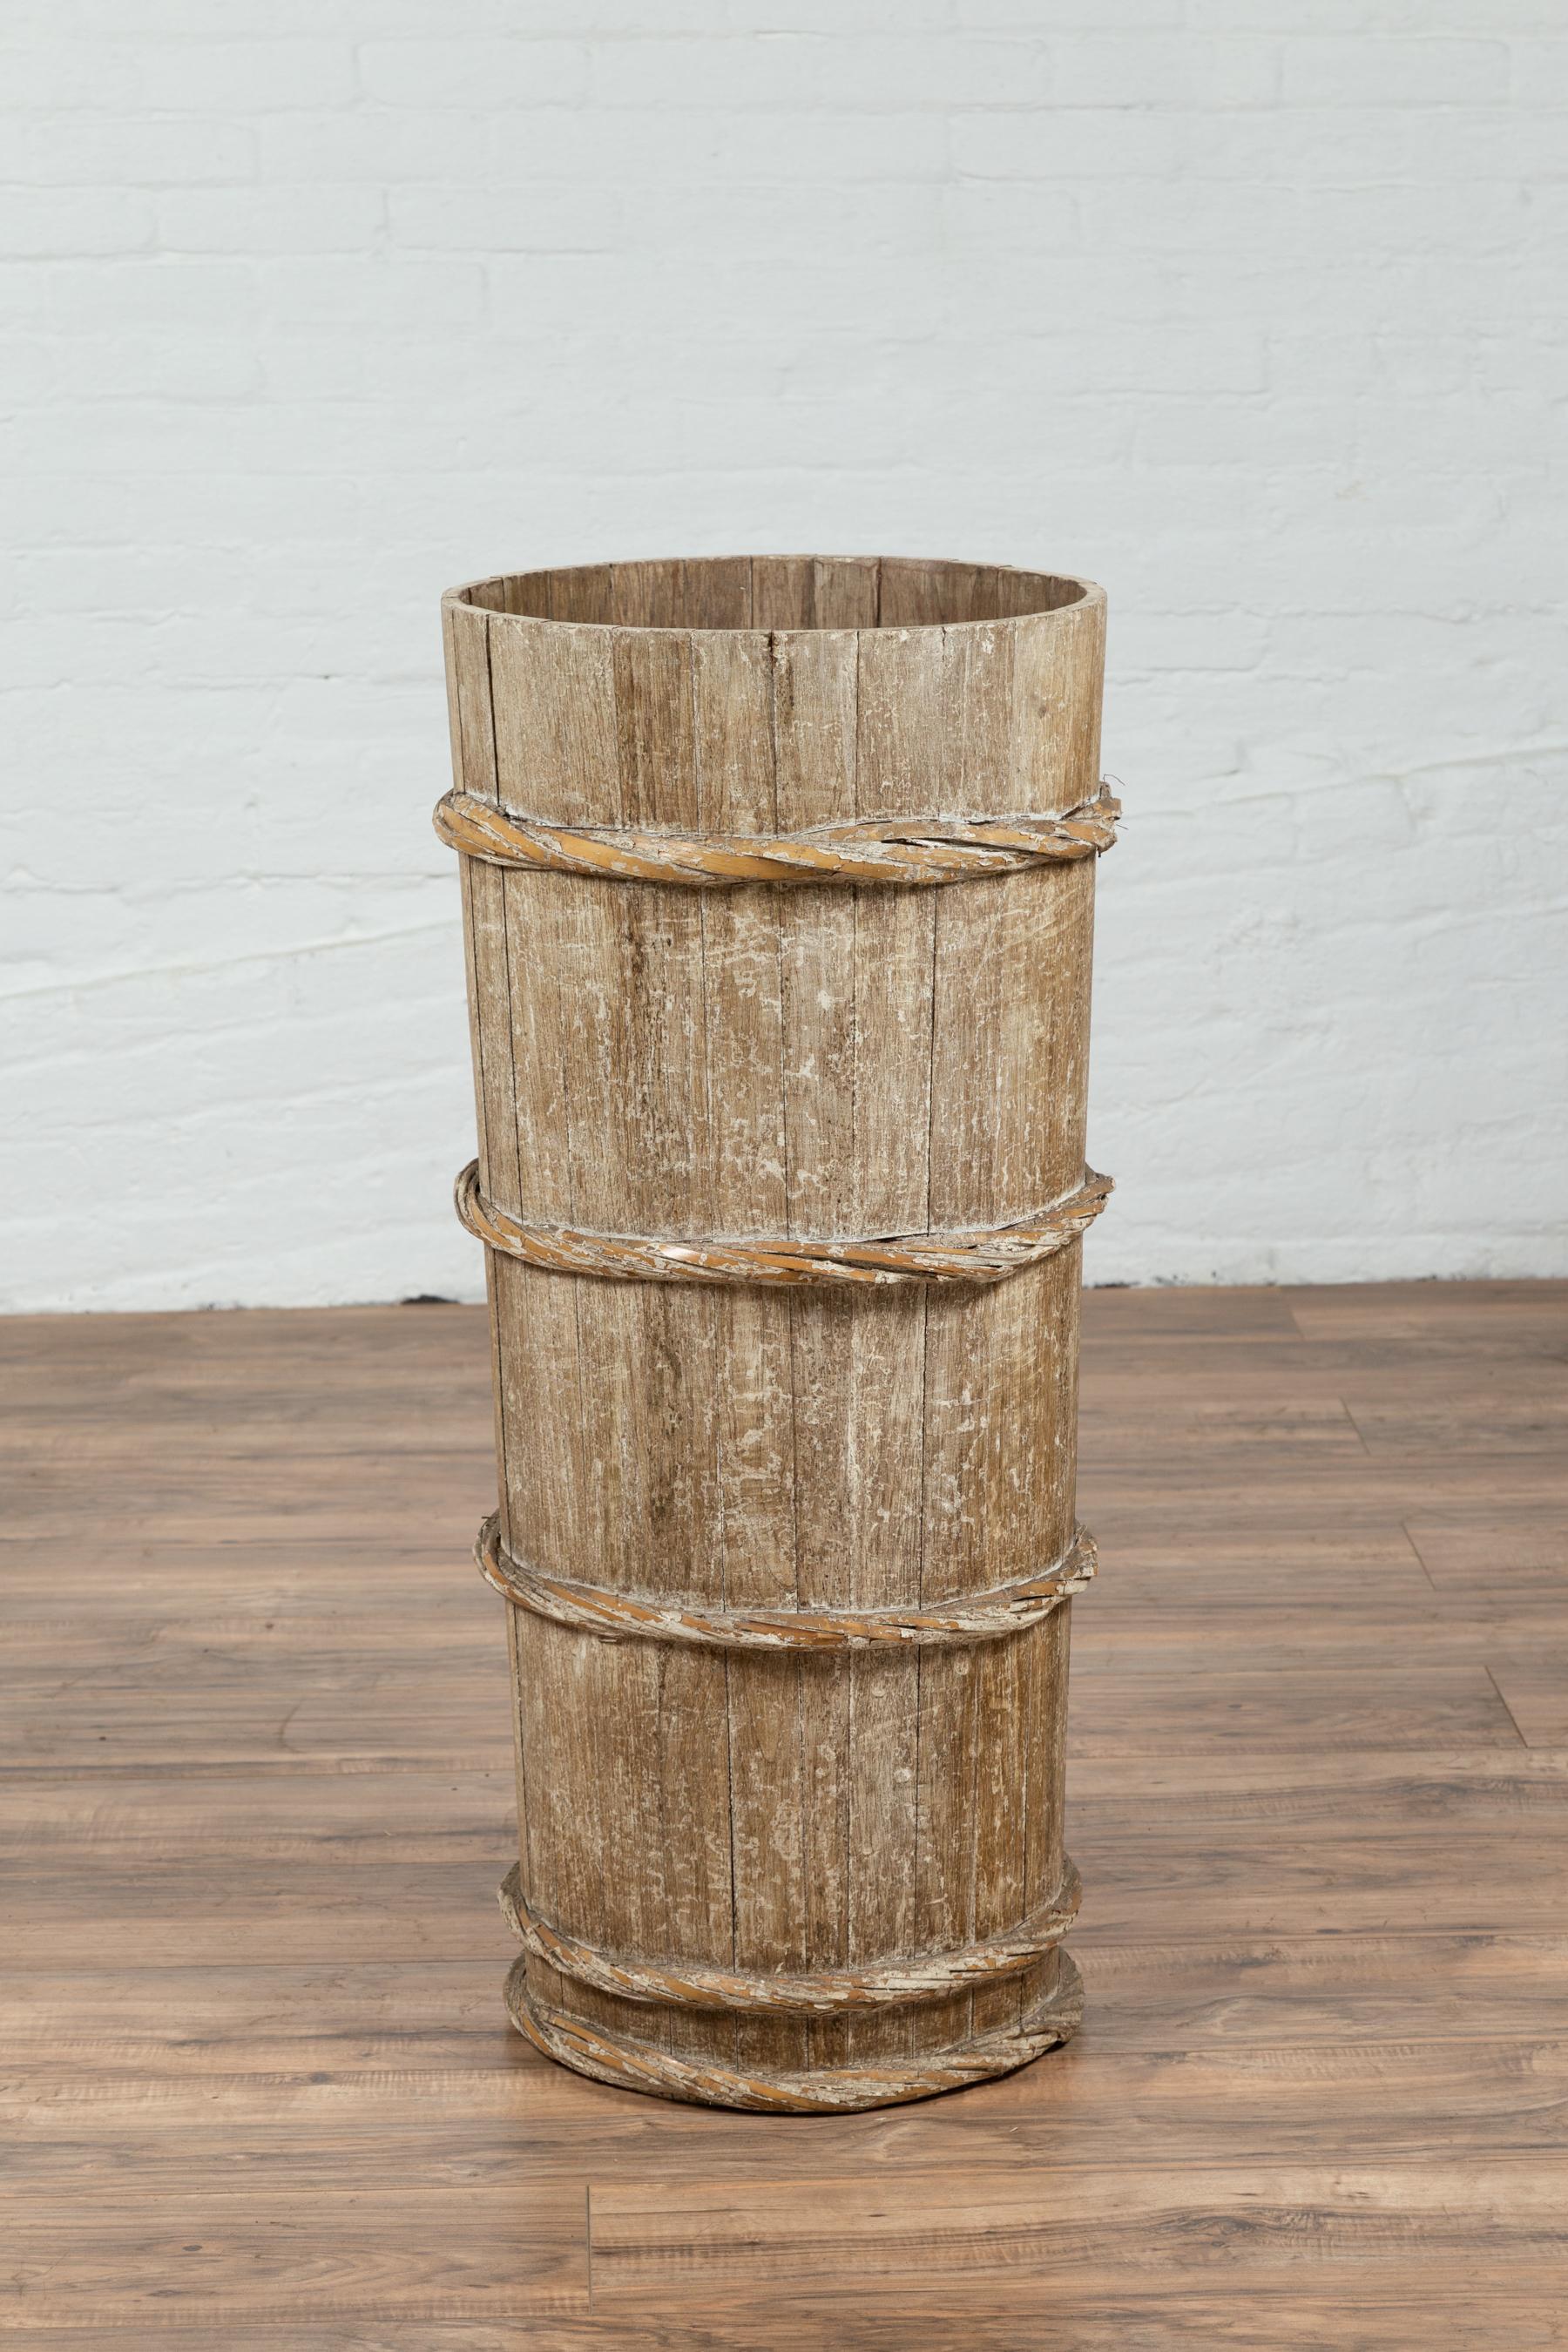 A tall vintage wooden barrel from Northern Thailand, with slatted body and rope-style motifs. We are immediately drawn to the rustic feel and great proportions of this Thai barrel. Presenting a slatted tapering body accented with horizontal twisted